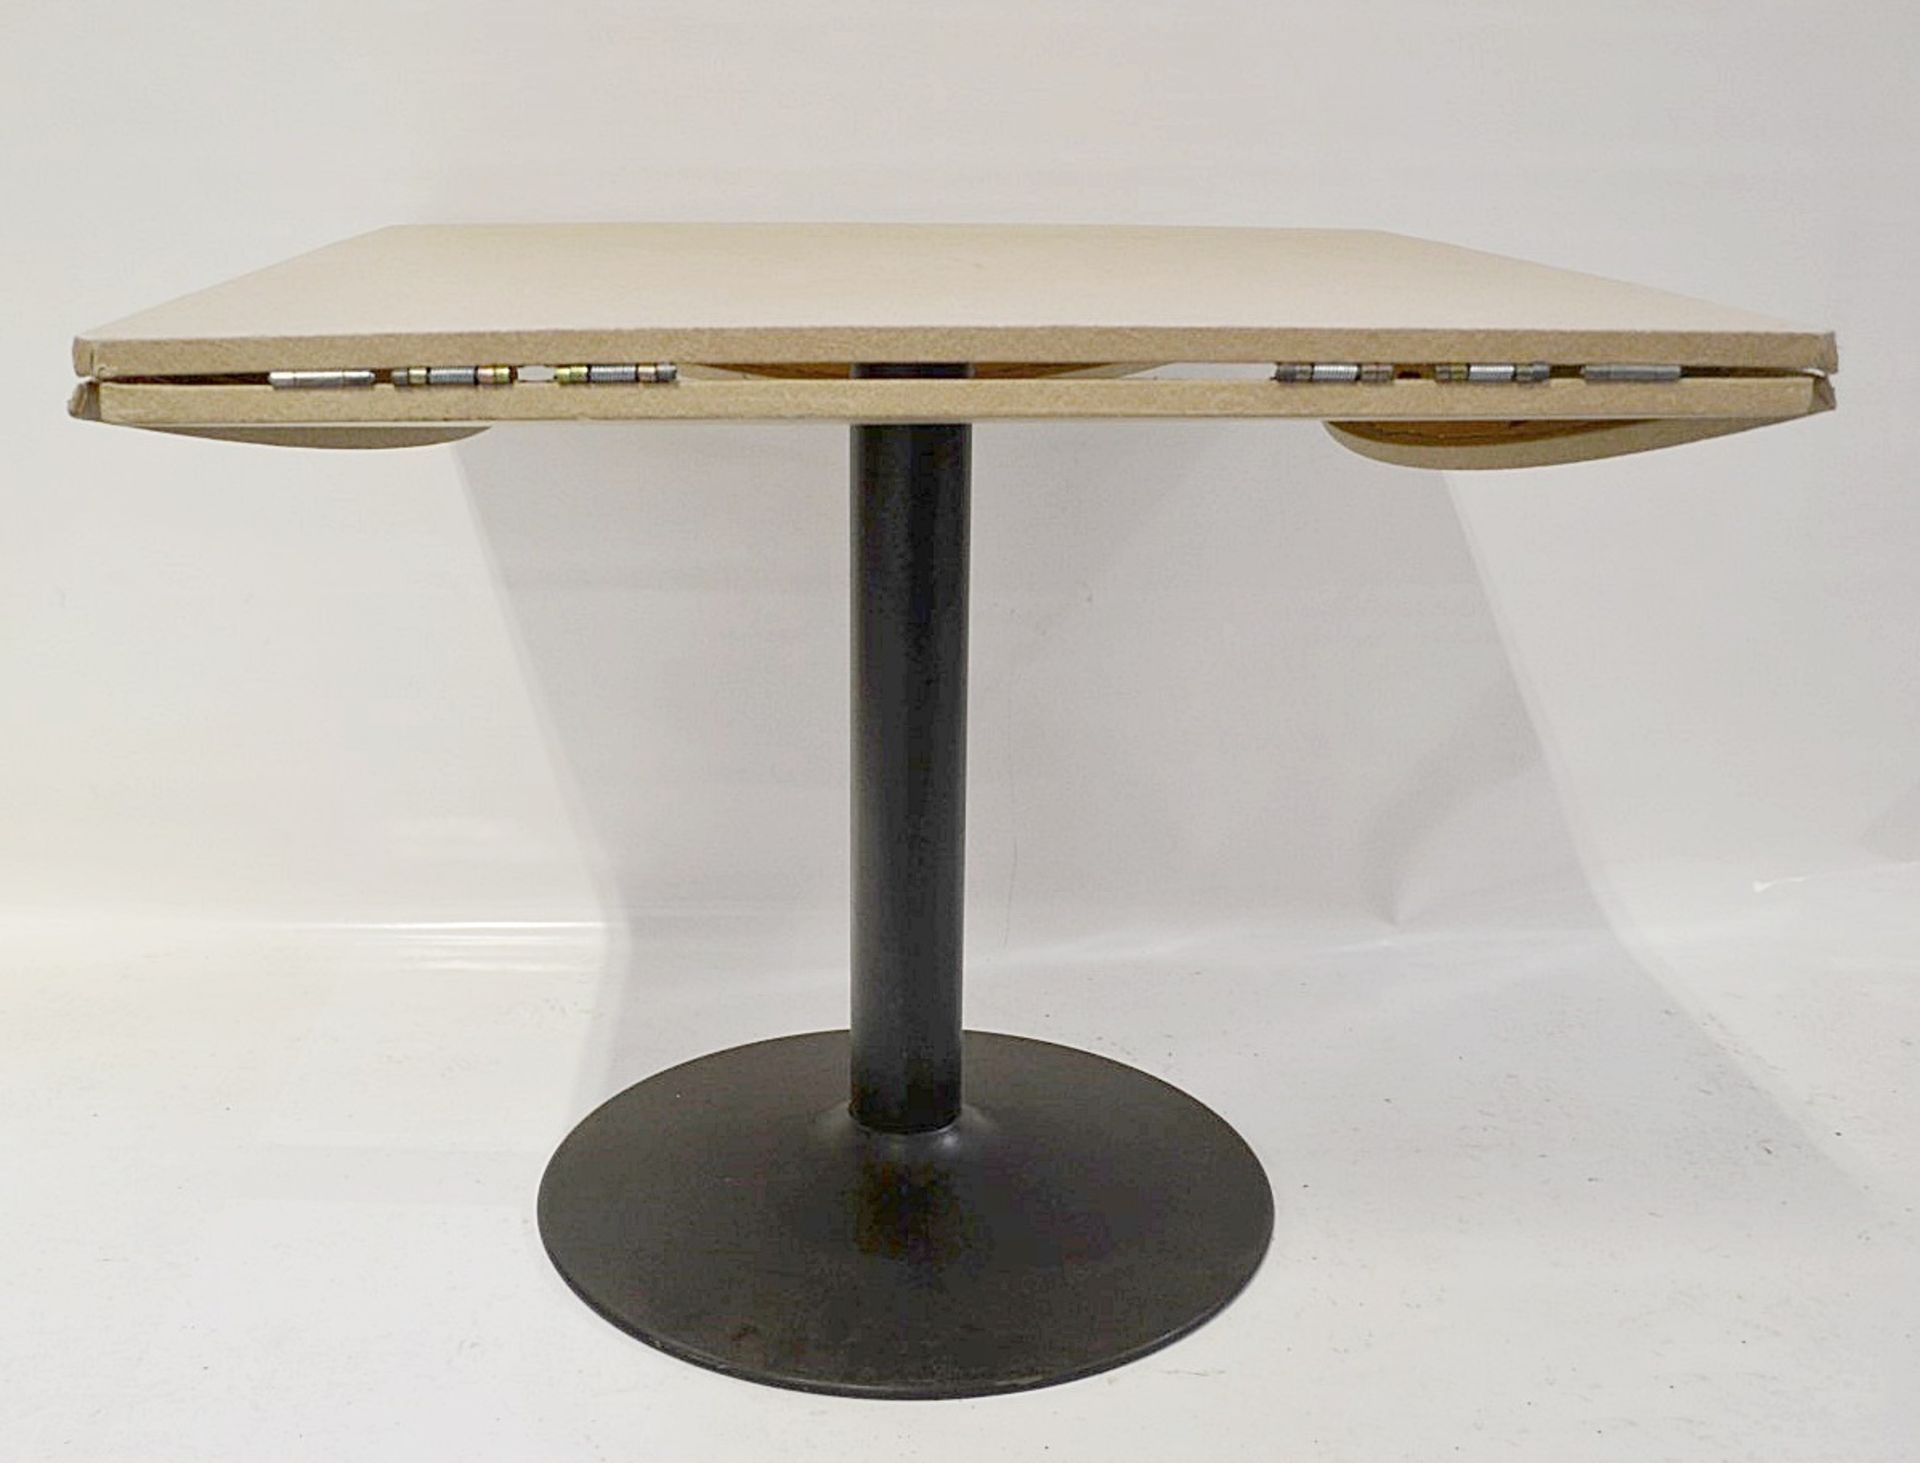 4 x Bespoke Upholstered Extending Bistro Tables - Recently Removed From Department Store - Presented - Image 5 of 7